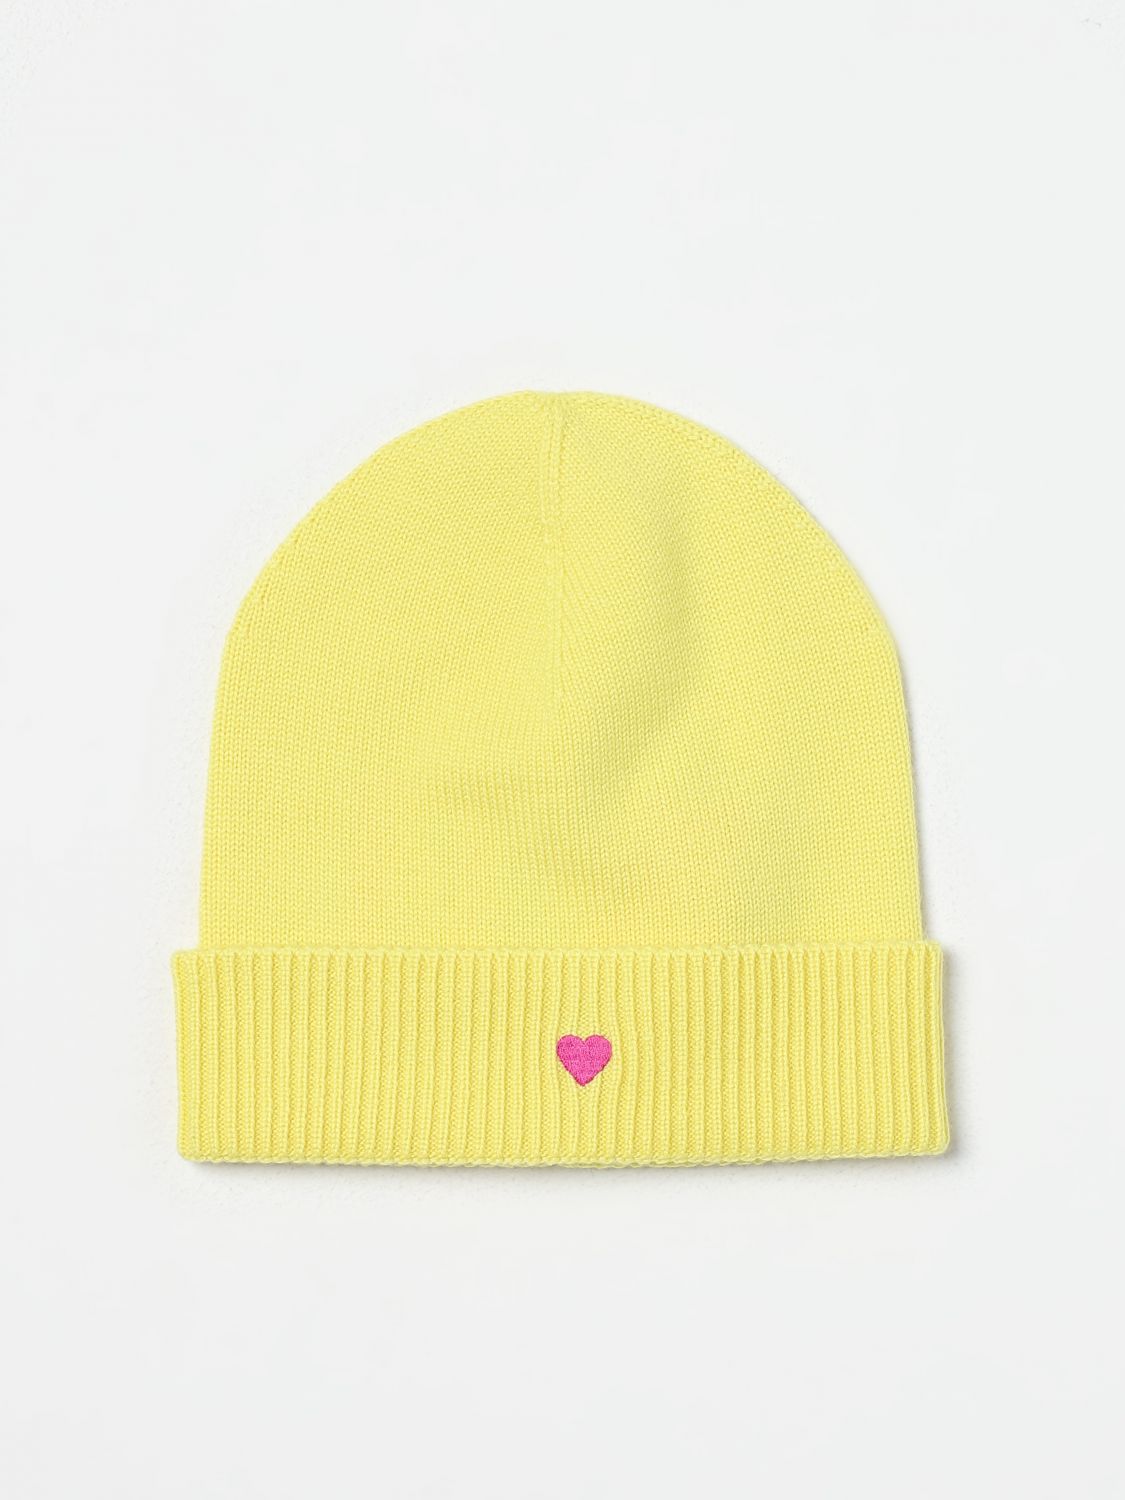 Max & Co. Kid Girls' Hats  Kids Color Yellow